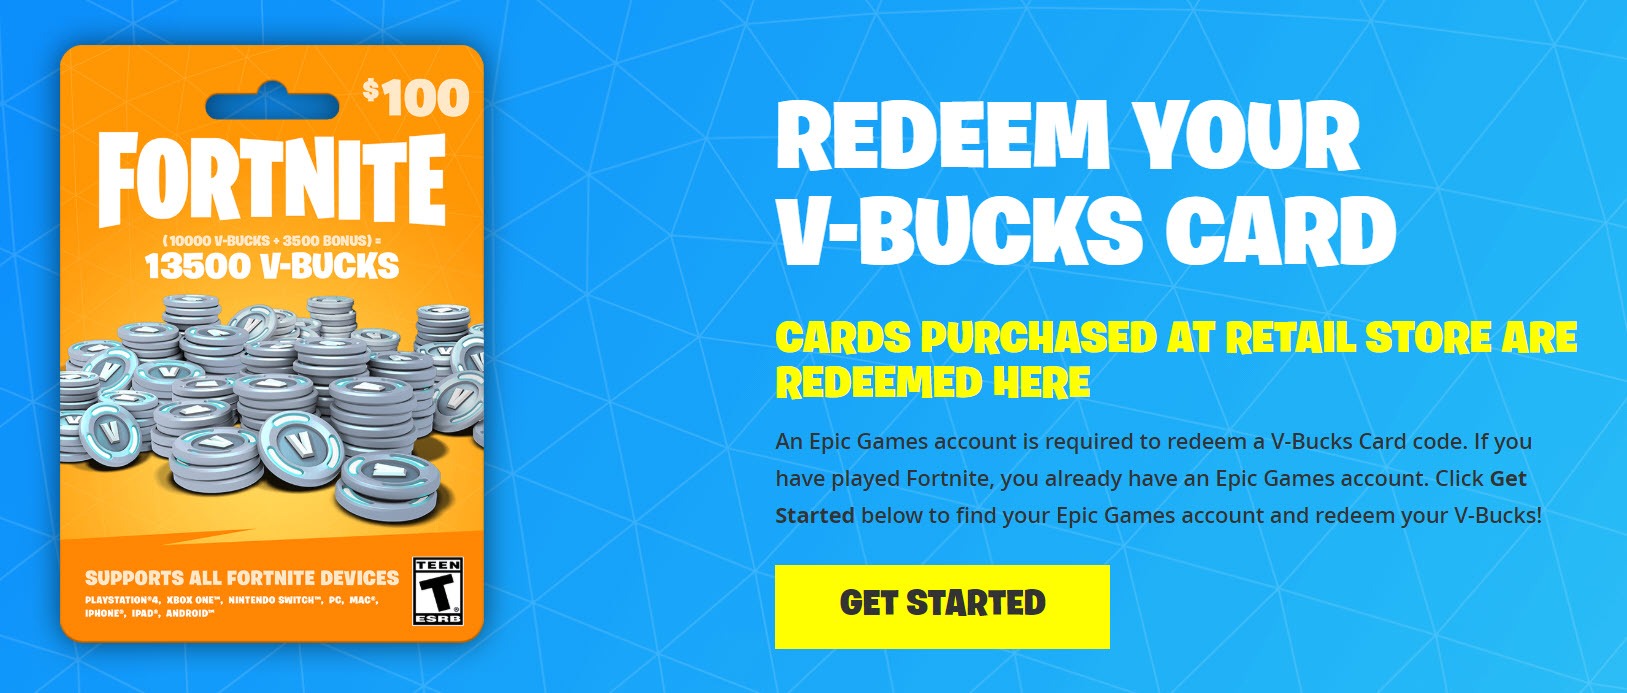 fortnite redeemable codes 2020